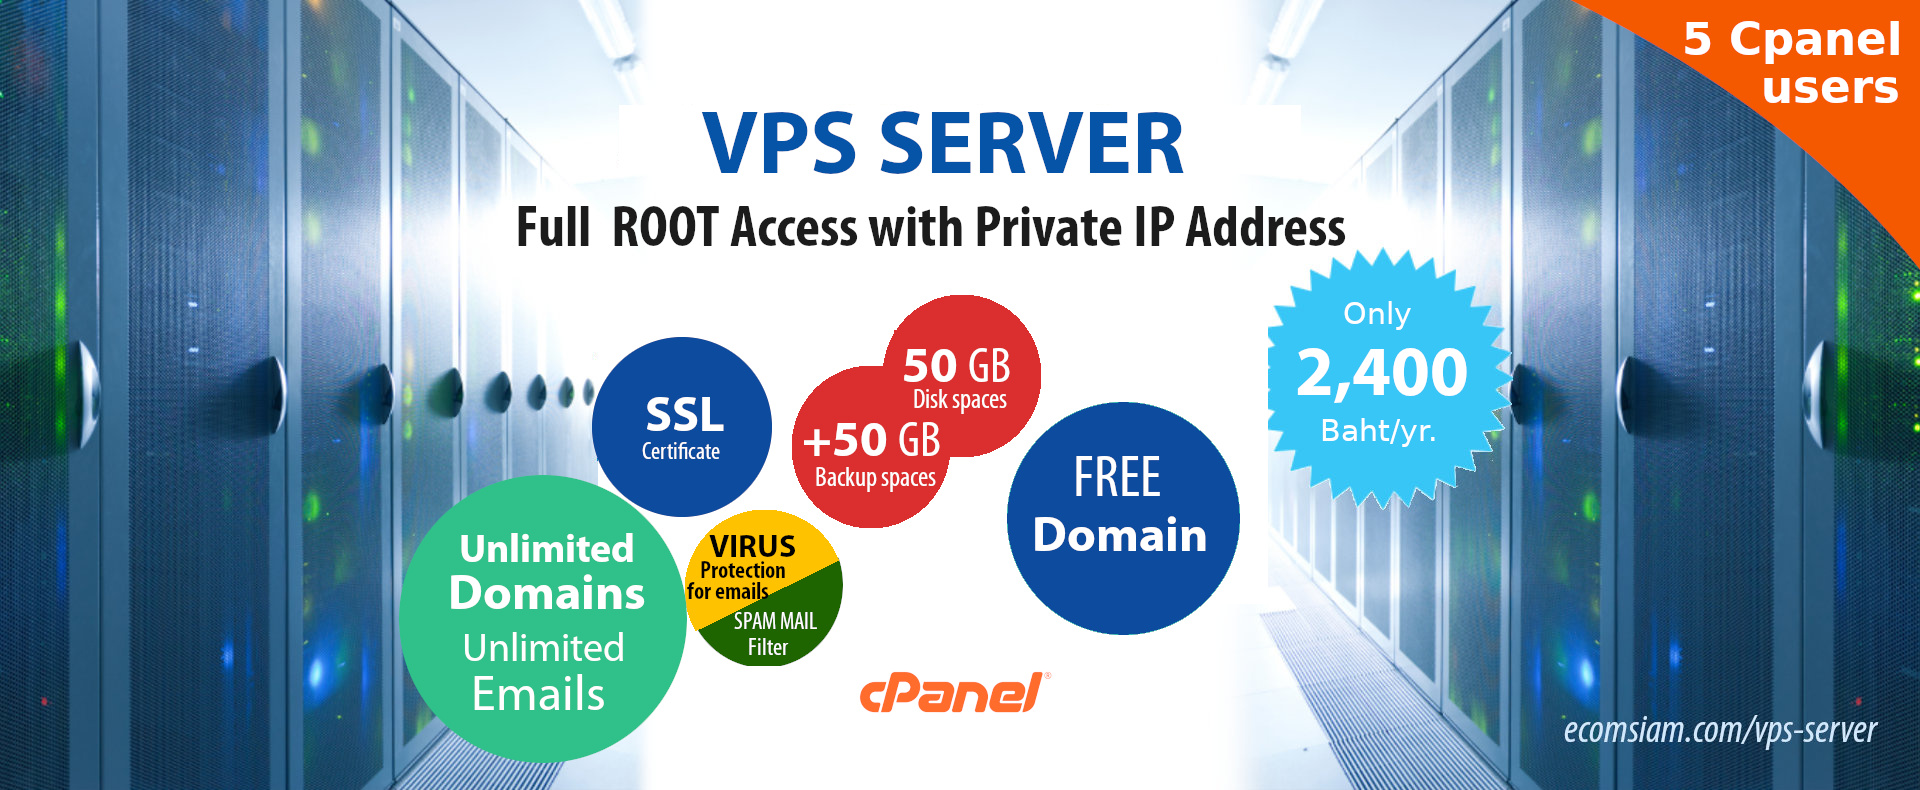 Linux VPS server  thailand or Versual Private Server (vPS) with cPanel WHM Control Panel,PRIVATE Name Servers,FULL Root Access,Private IP address,Private name server,unlimited addon domains ,unlimited emails and free domain